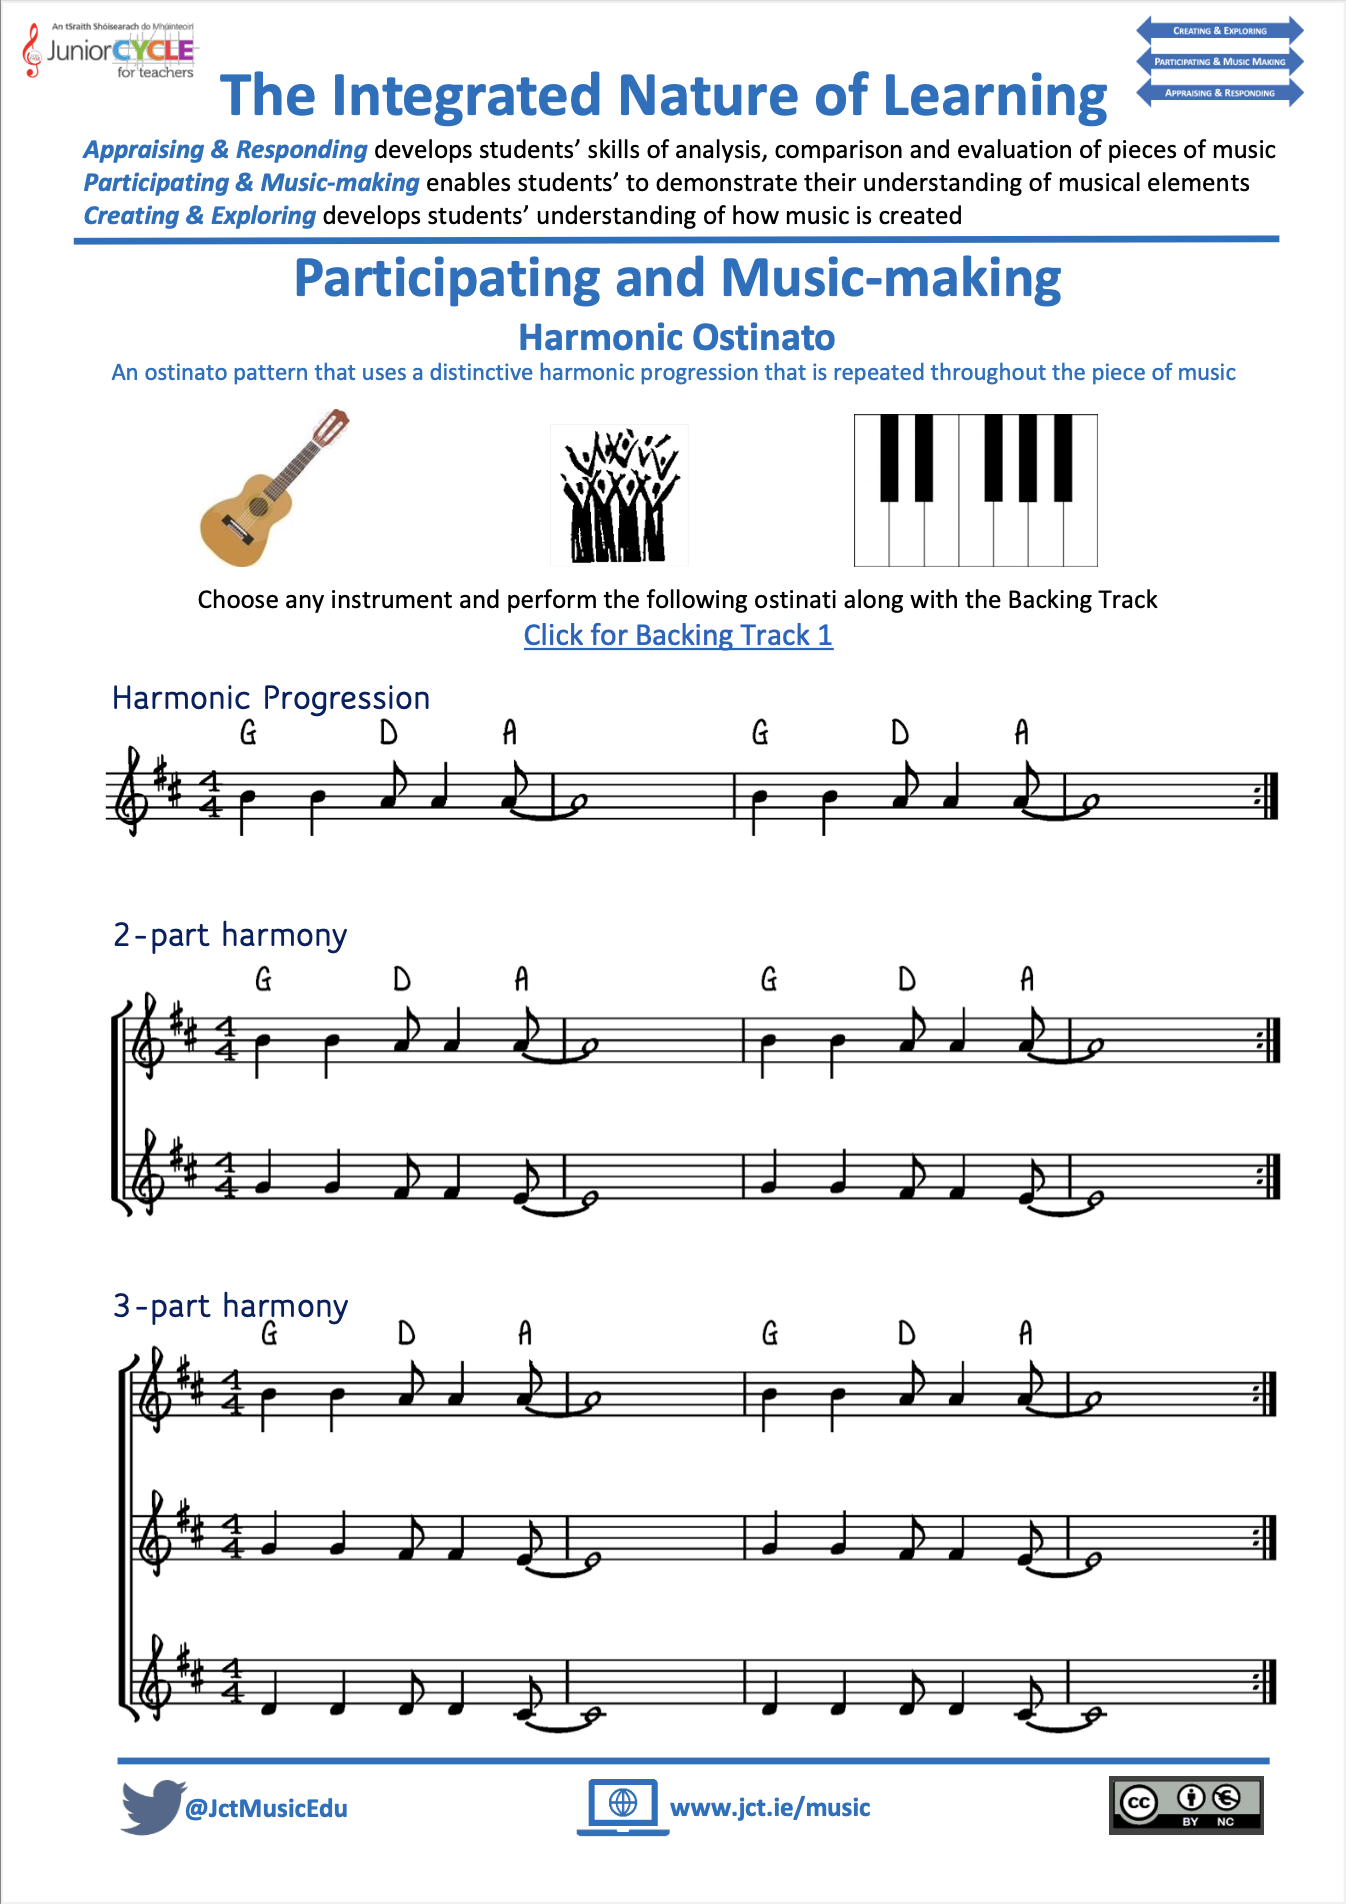 The Integrated Nature of Learning: Participating and Music-Making (Harmonic Ostinato 1)